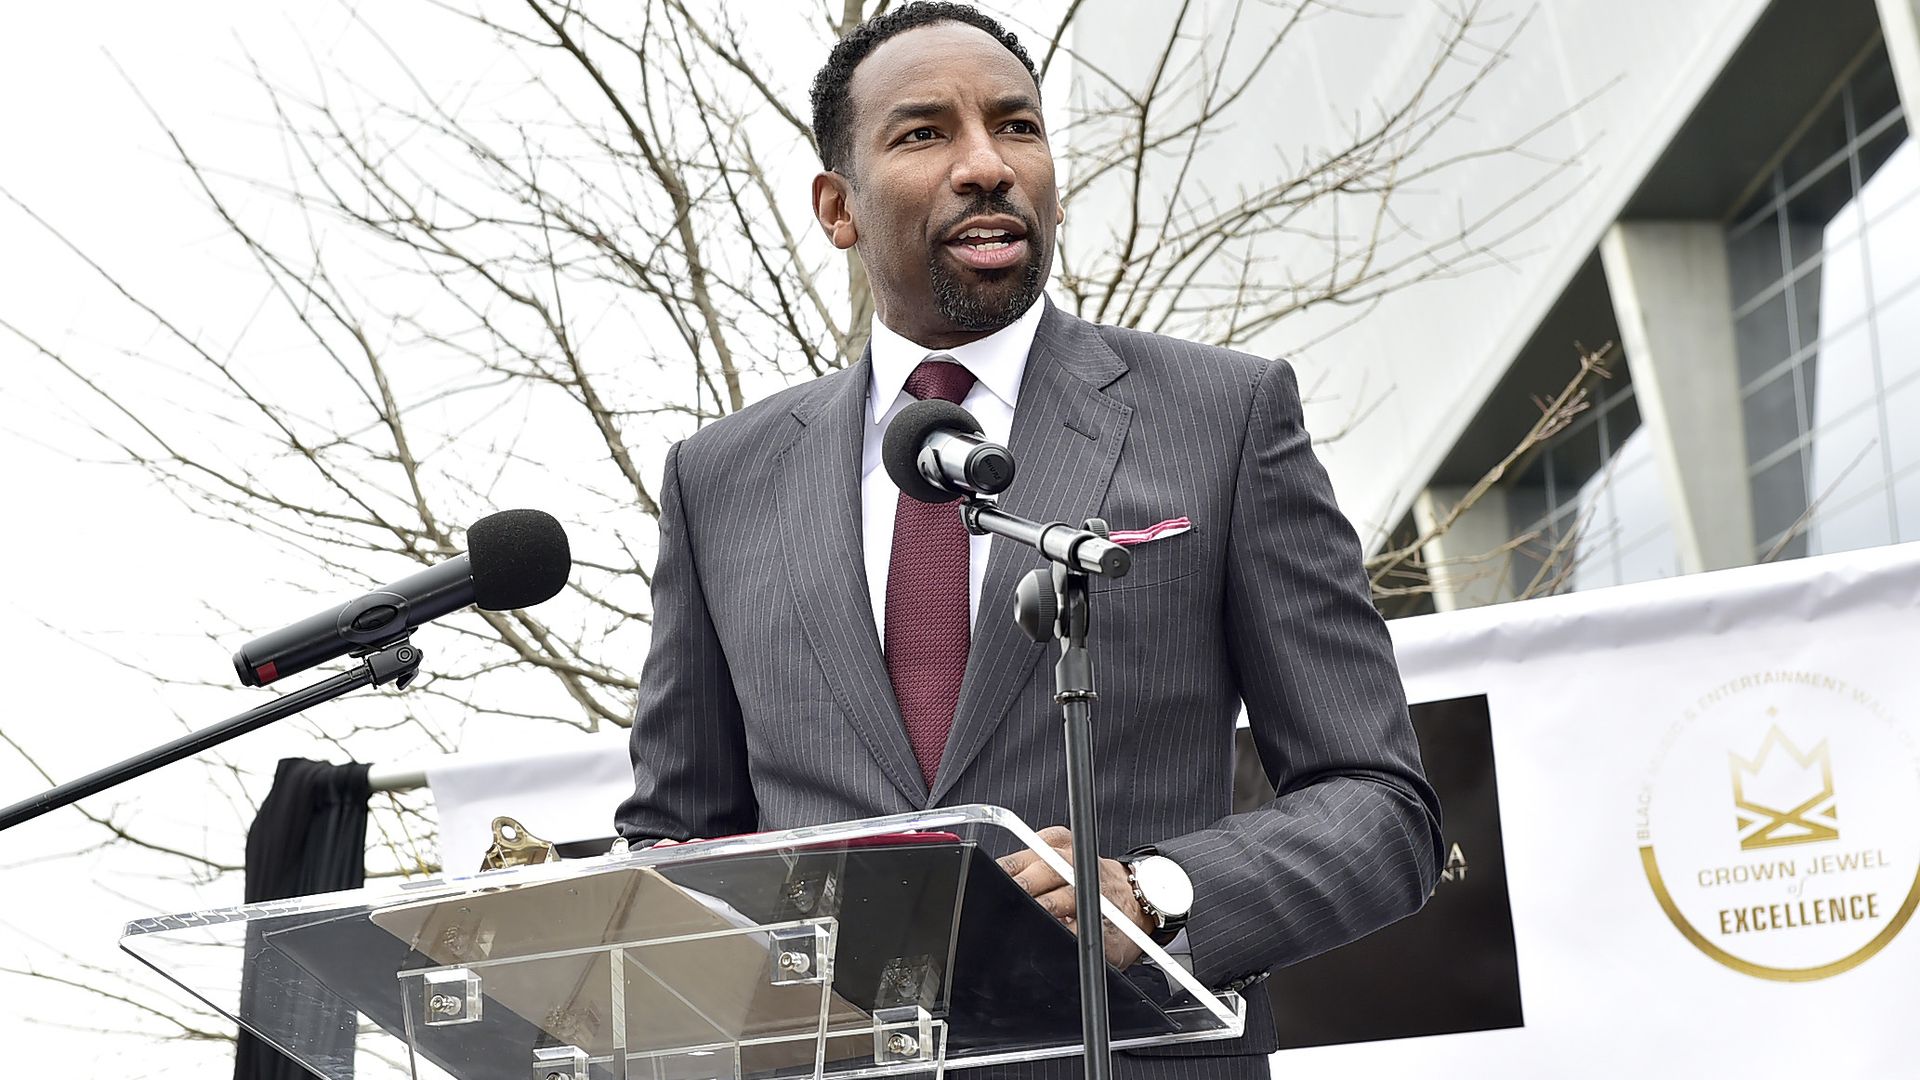 Andre Dickens wears a gray suit and speaks at a lectern